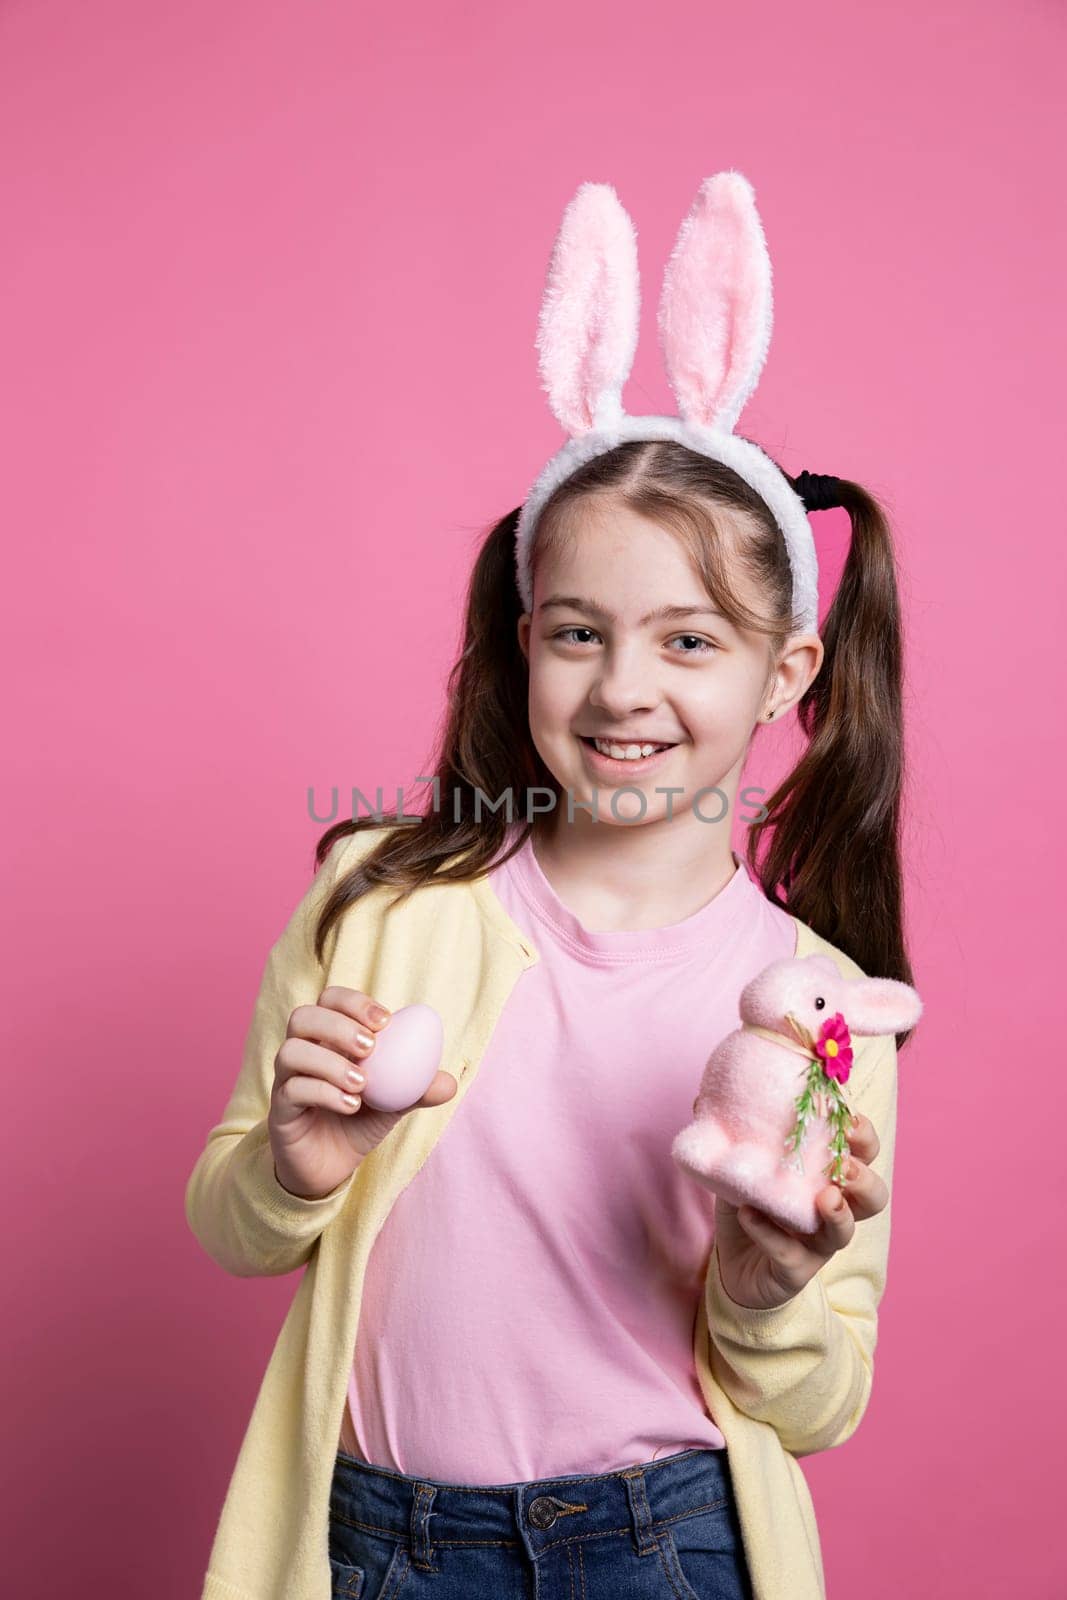 Optimistic small kid posing with painted eggs and a pink rabbit toy, wearing fluffy bunny ears and being cheerful in front of camera. Young girl with pigtails showing her easter decorations.